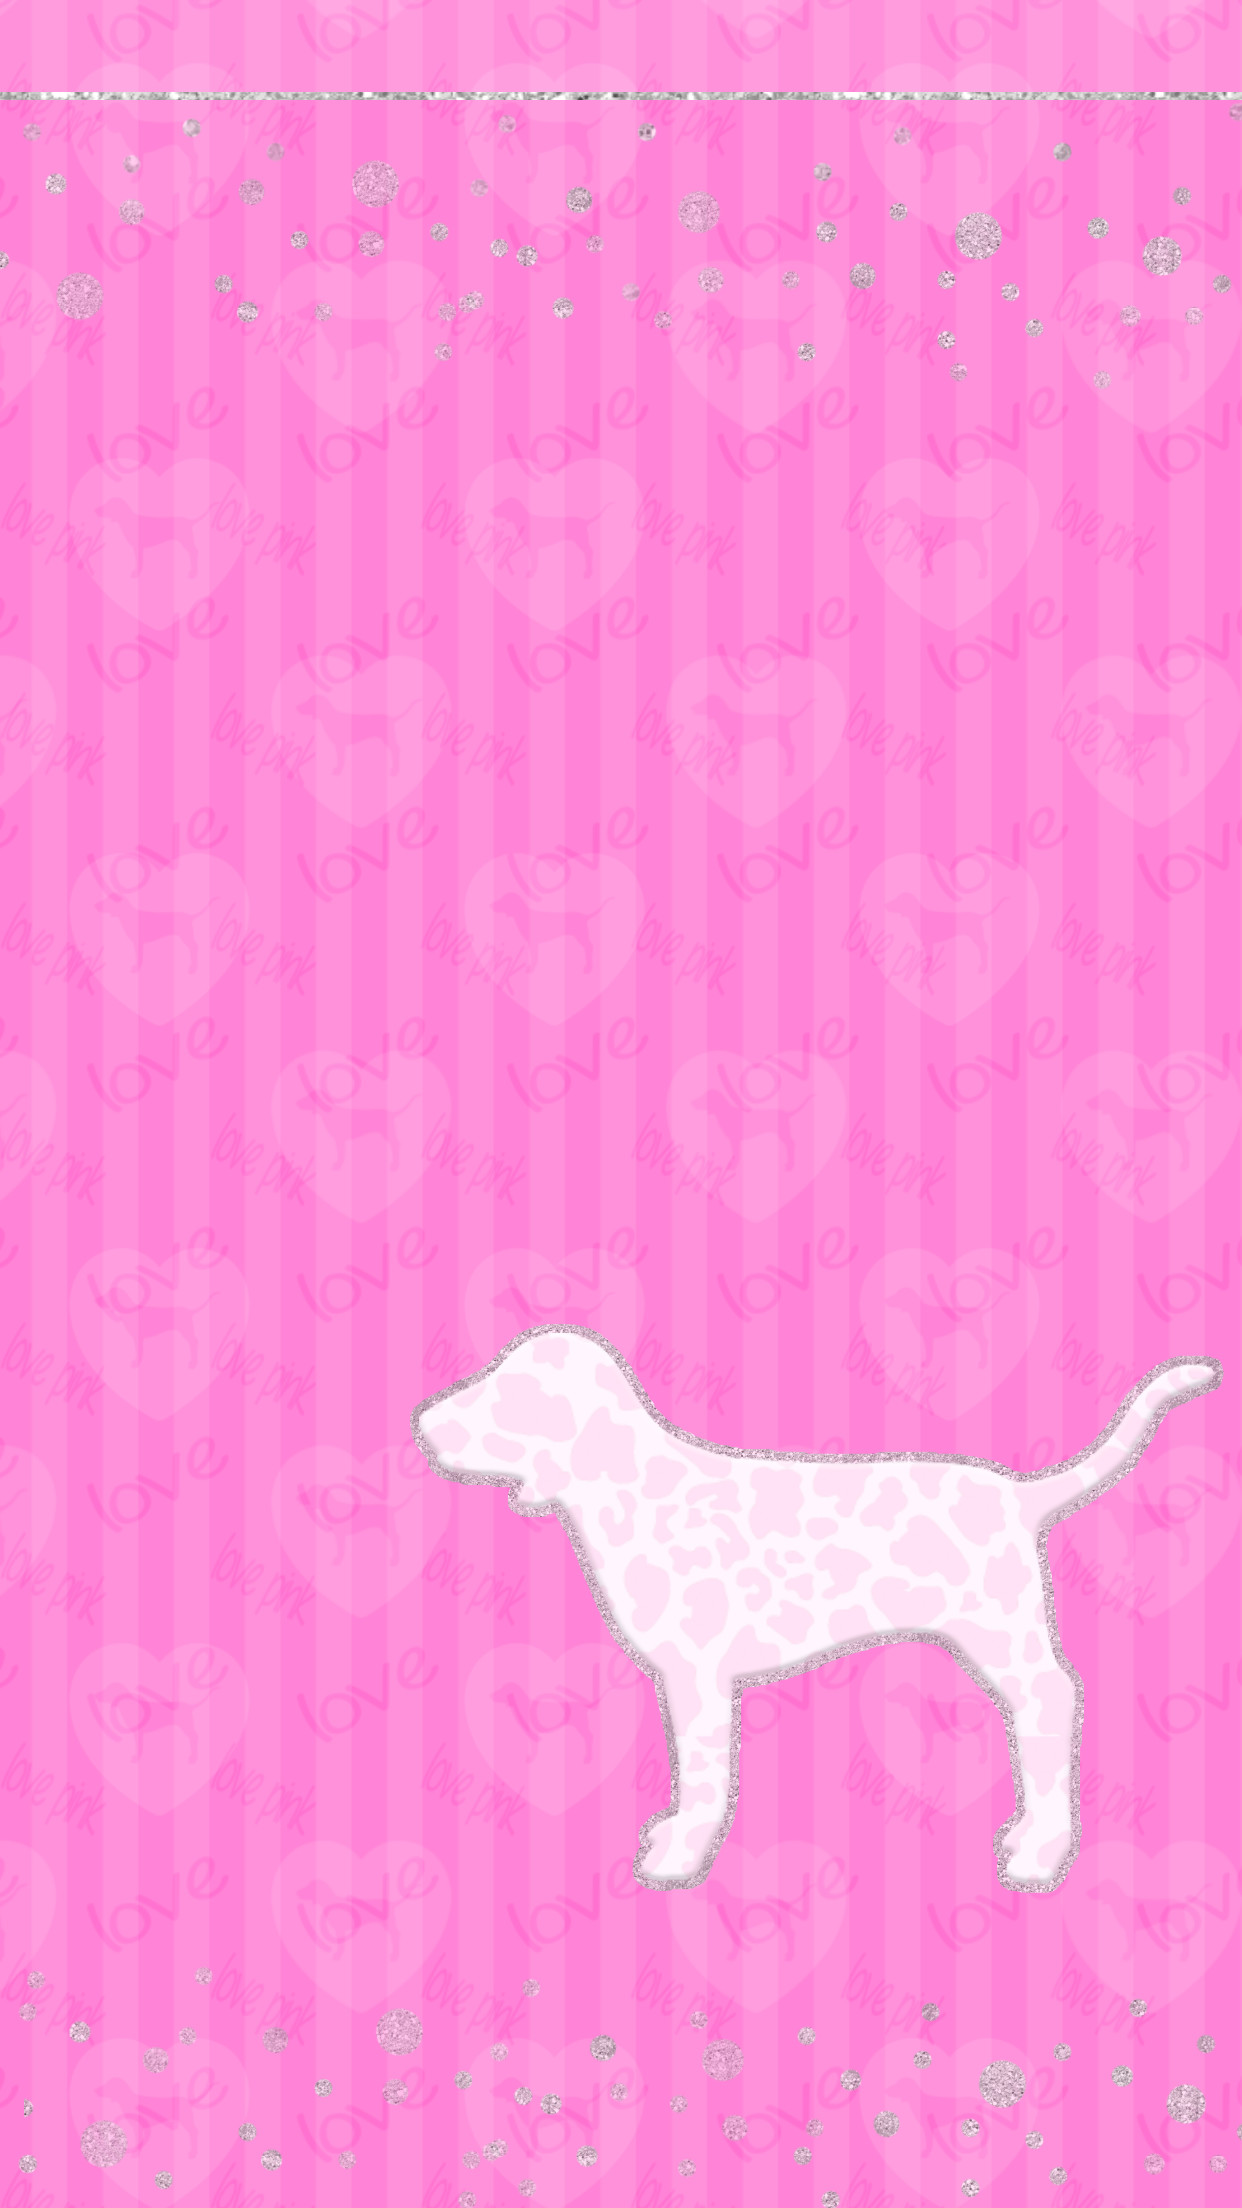 1242x2208 Cute Wallpapers, Phone Wallpapers, Iphone 2, Printer, Hello Kitty, Shelves,  Walls, Funds, Pictures. PINK